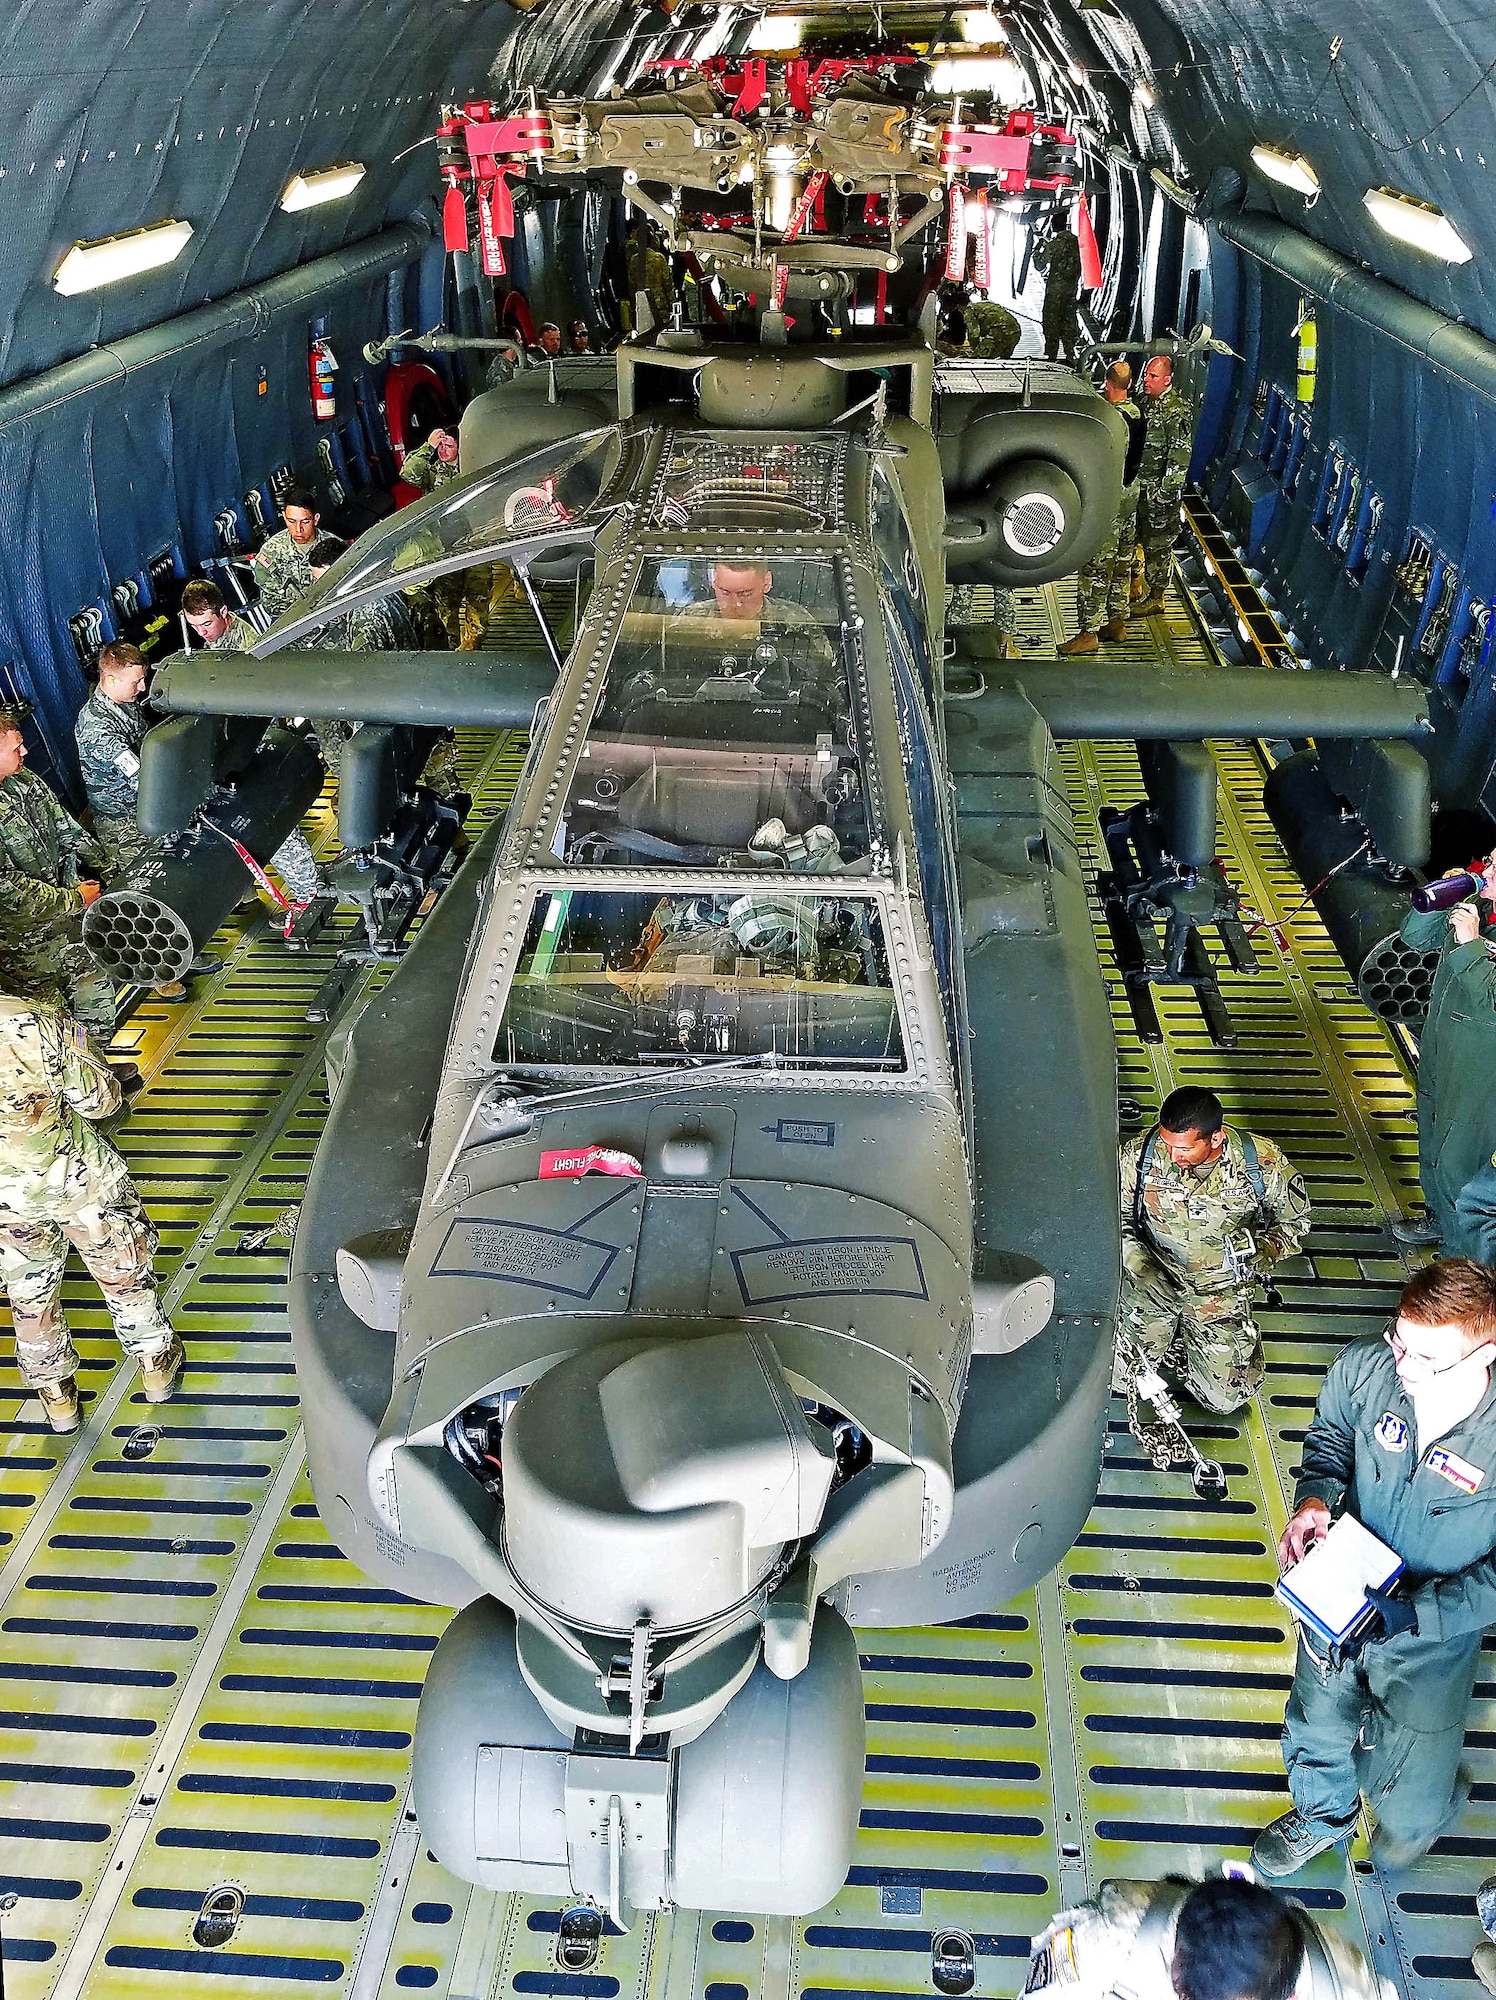 Soldiers from the 1st Calvary Division, 1st Air Combat Brigade, 615th Aviation Support Battalion from Ft. Hood, Texas and Airmen from the 433rd Airlift Wing evaluate uploaded Army helicopters June 23, 2017 at Joint Base San Antonio-Lackland, Texas. The exercise, Operation Silver Galaxy, featured Airmen training Soldiers how to secure their aircraft for a deployment in the cargo area of a C-5M Super Galaxy. (U.S. Air Force photo by Tech. Sgt. Carlos J. Trevino)